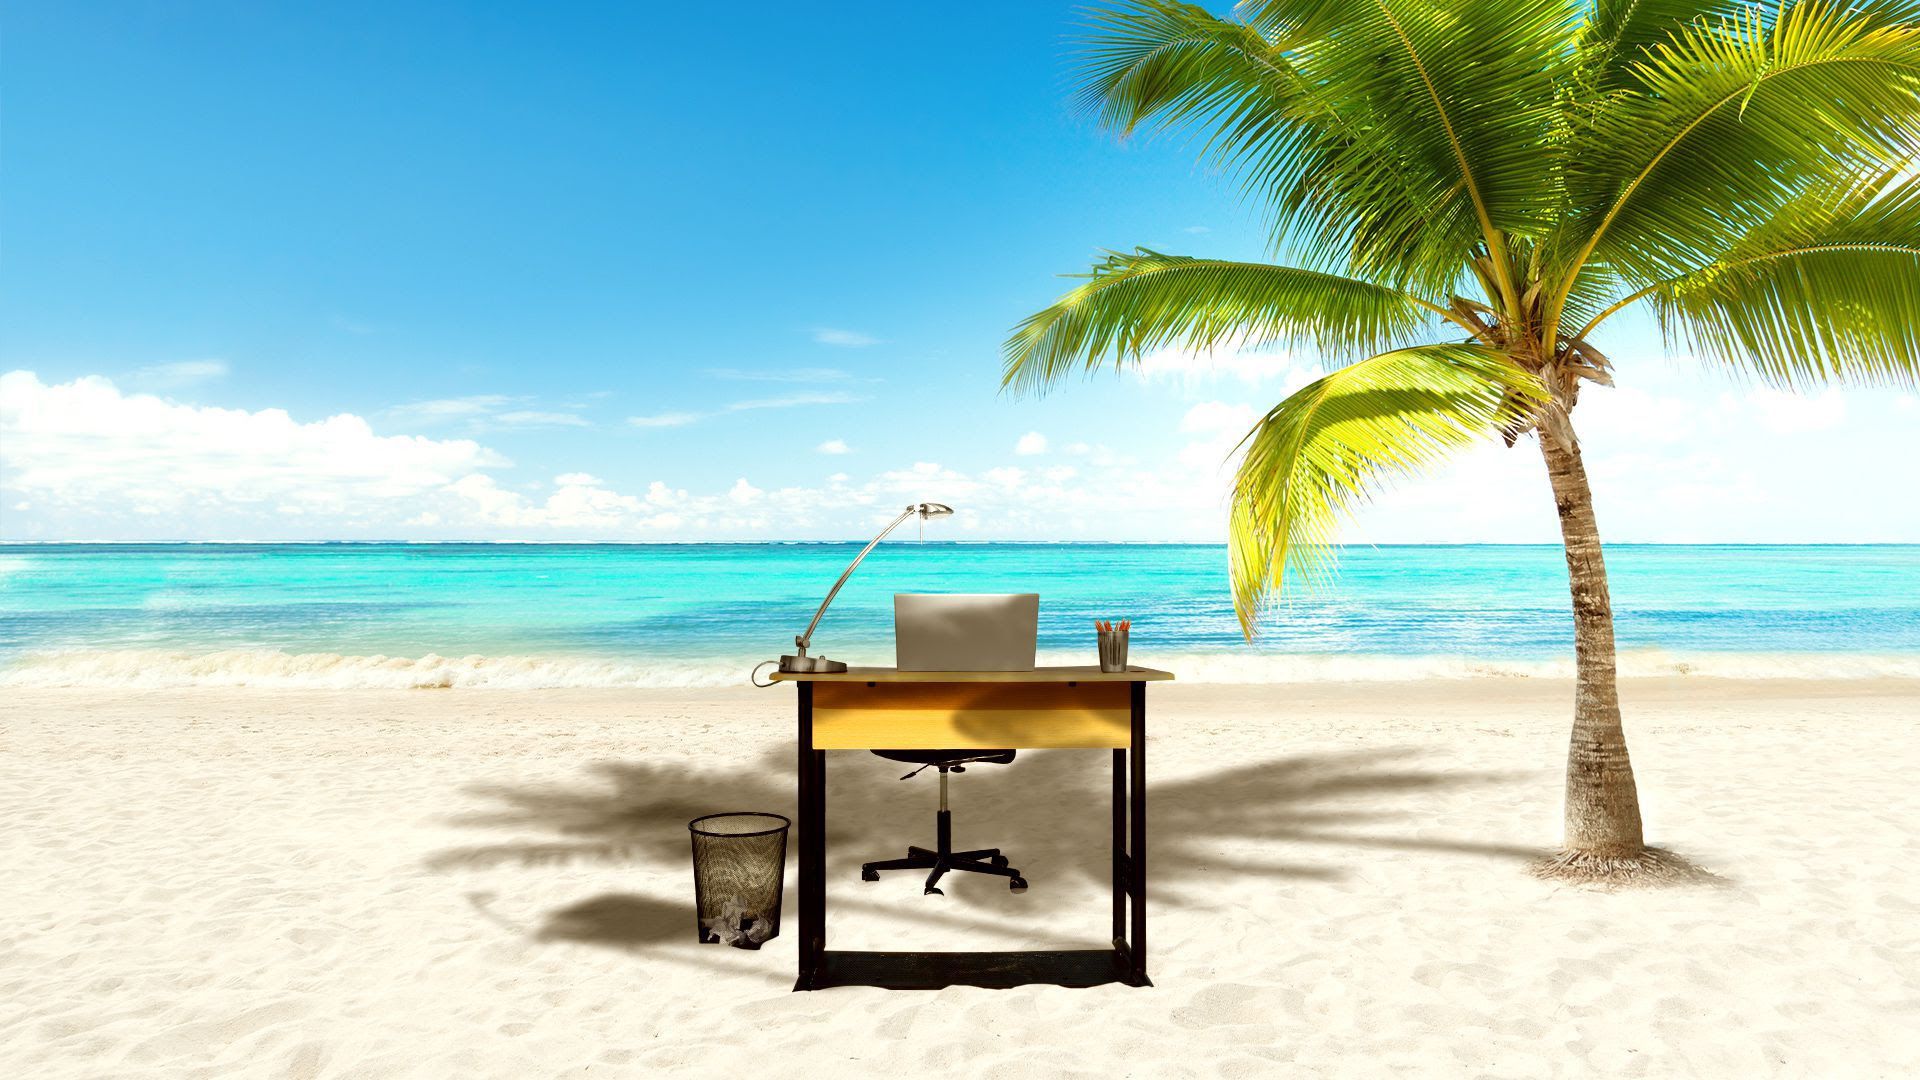 Illustration of a workspace desk at a tropical beach location